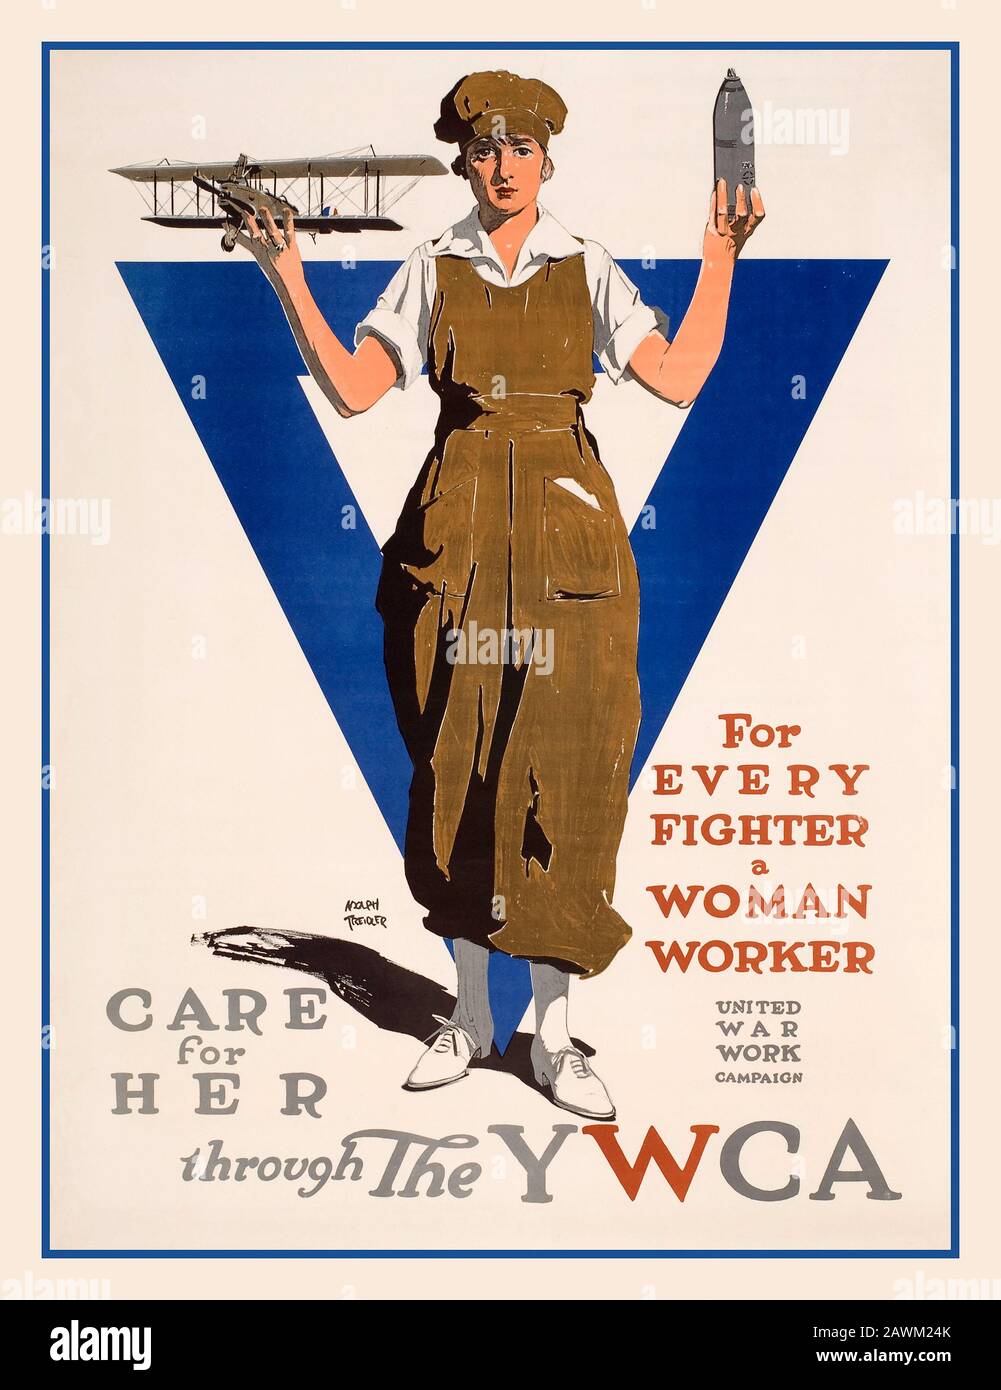 WW1 1900's Propaganda Recruitment Poster YWCA - For Every Fighter a Woman Worker. Care for her through the YWCA United War Work Campaign by Adolph Treidler  ca. 1918.  American Lithographic Co., New York. USA Stock Photo